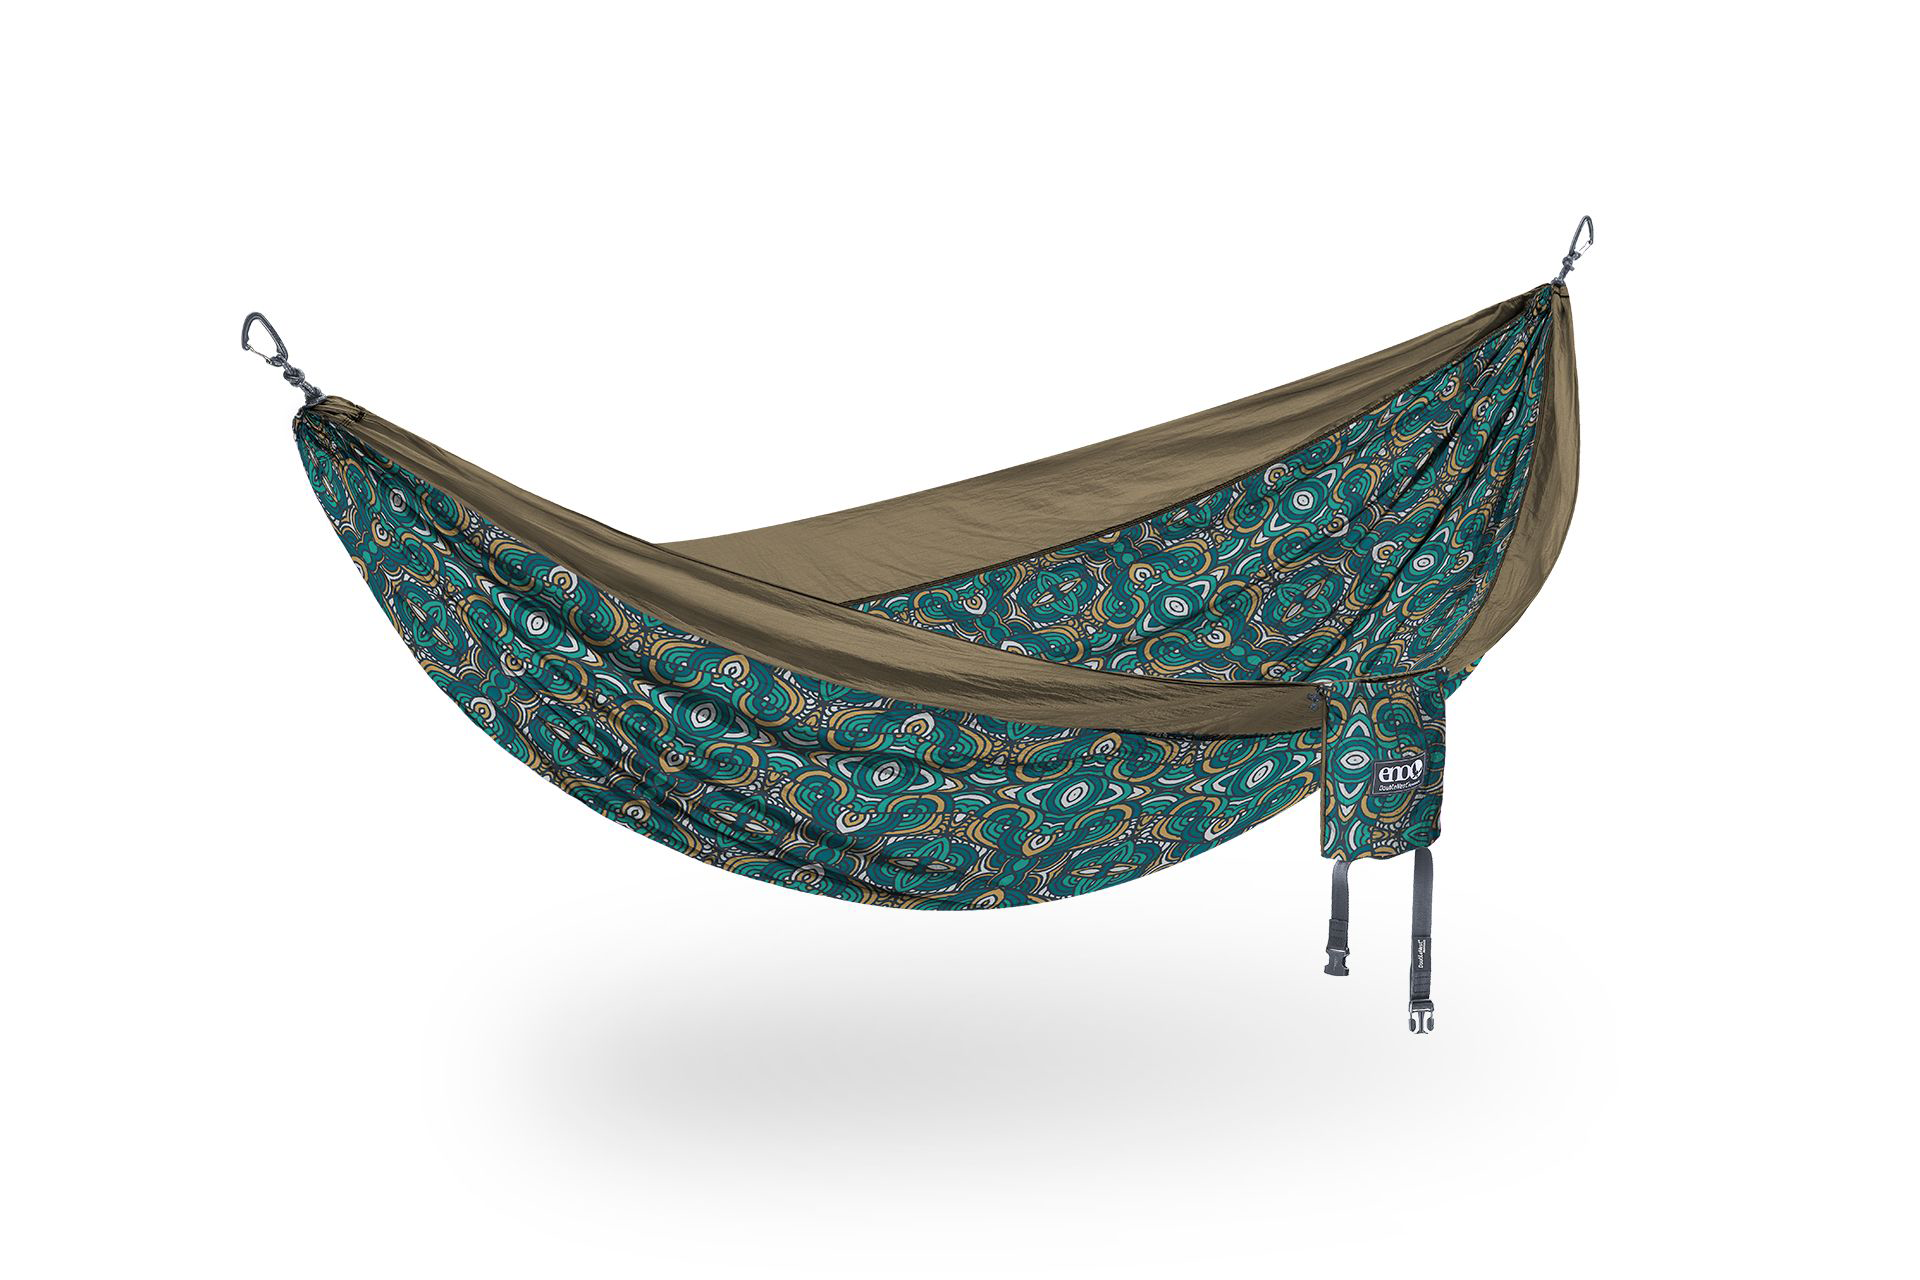 Eagles Nest Outfitters Giving Back Collection Gond Community of India ENO DoubleNest Print Hammock